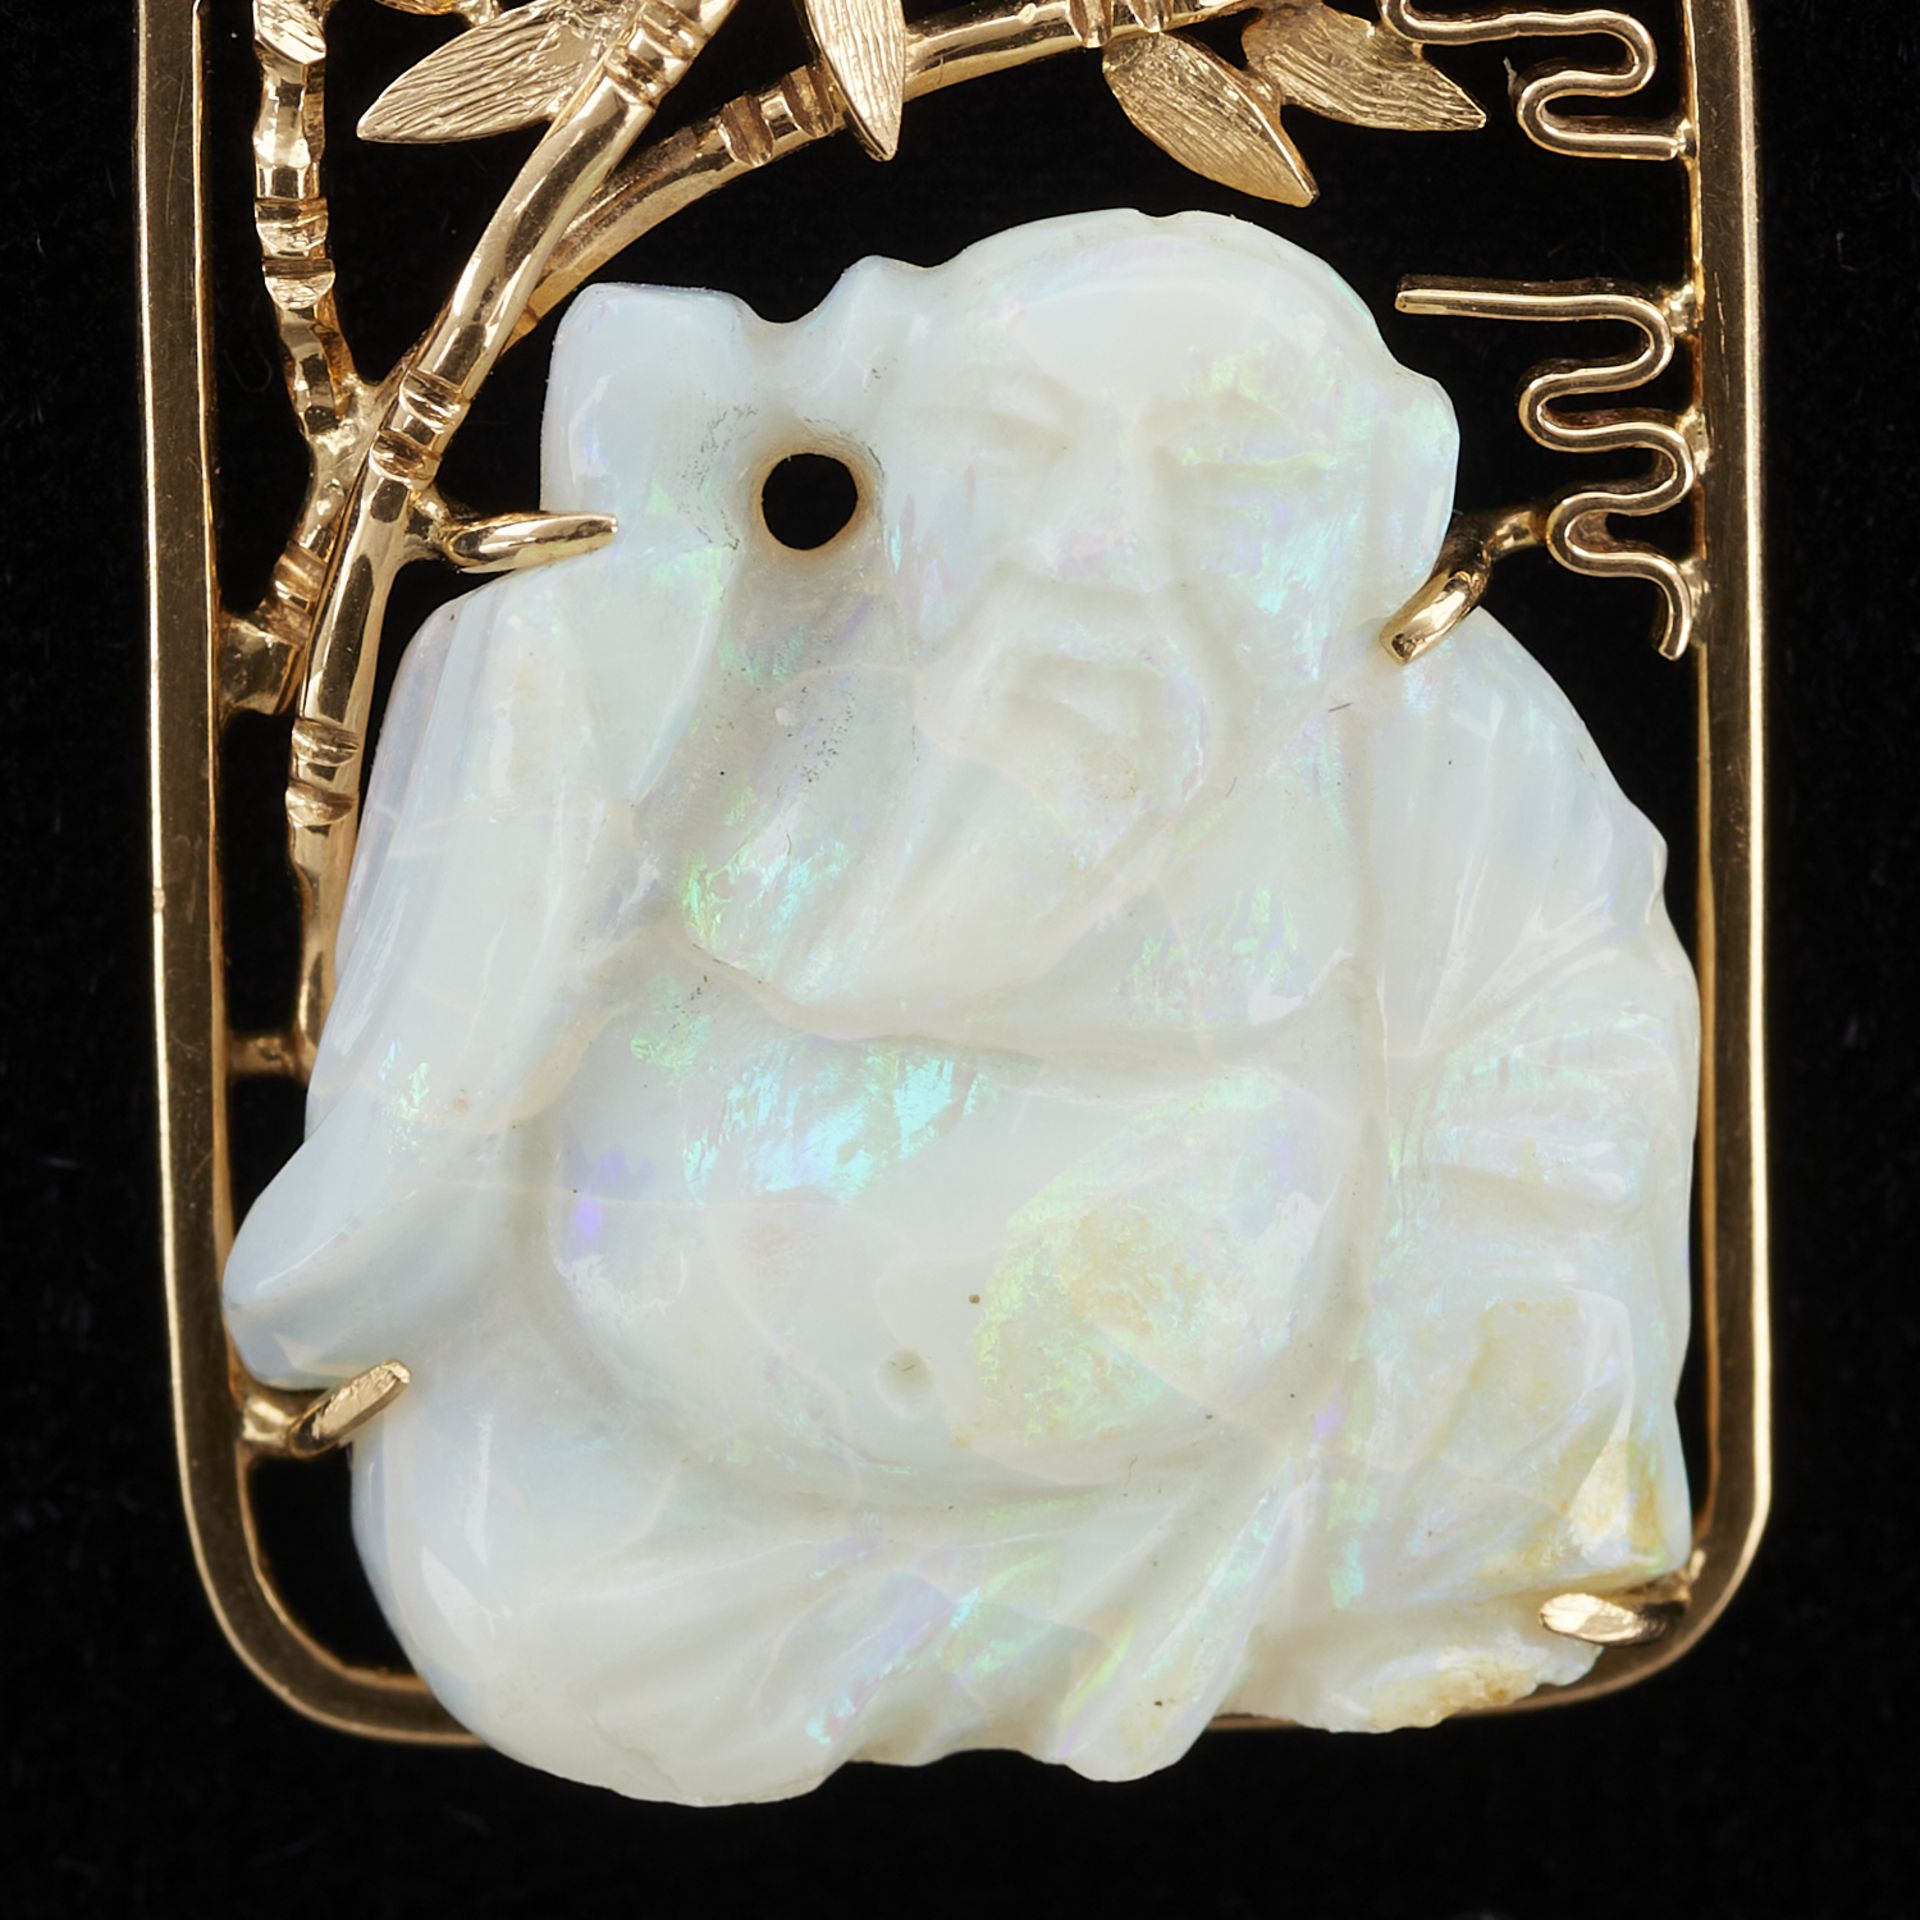 14k Yellow Gold Pendant w/ Carved Opal Buddha - Image 6 of 6